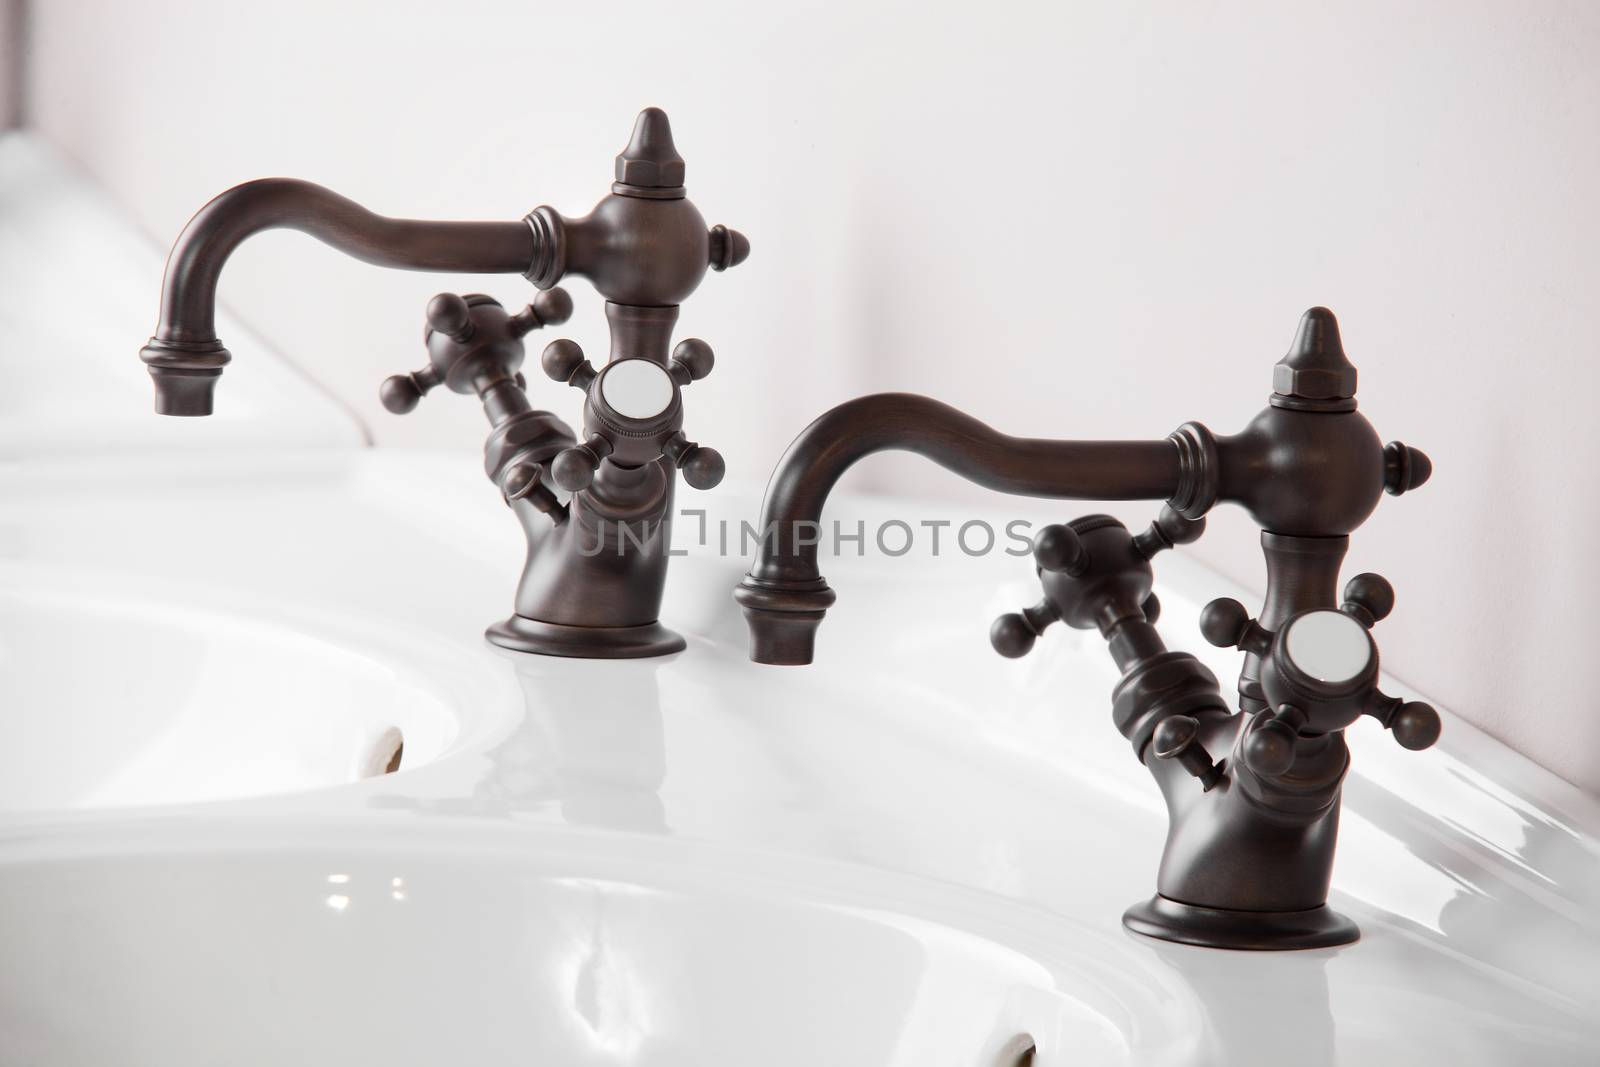 Water tap by fiphoto